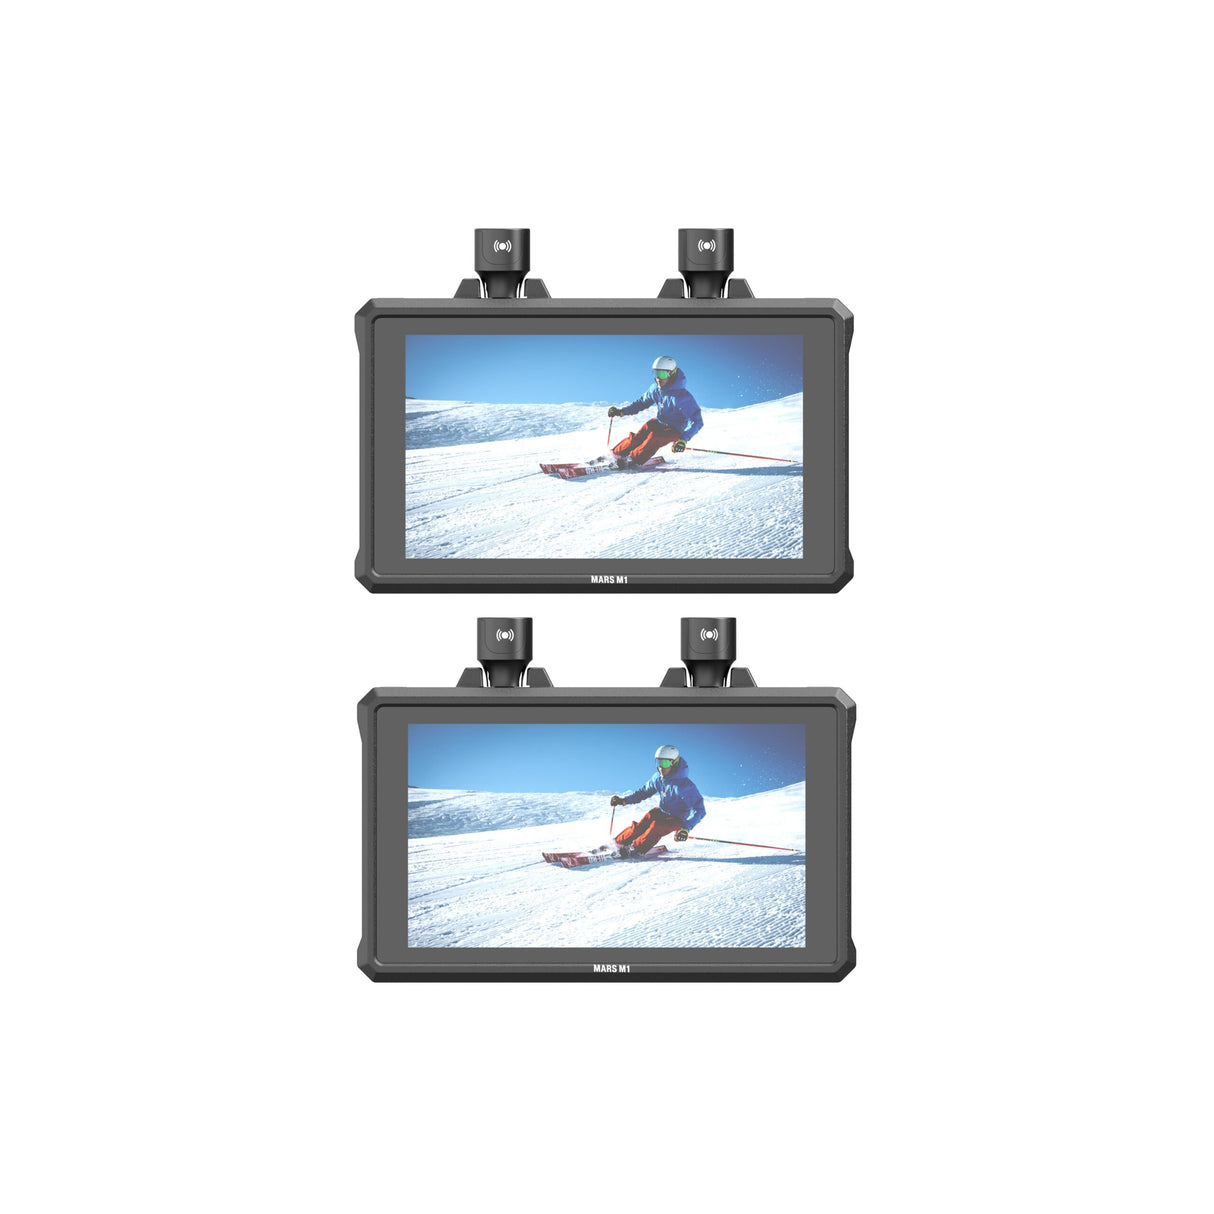 Hollyland Mars M1 5.5-Inch Monitor with Built-in Video Transmitter/Receiver Duo Pack